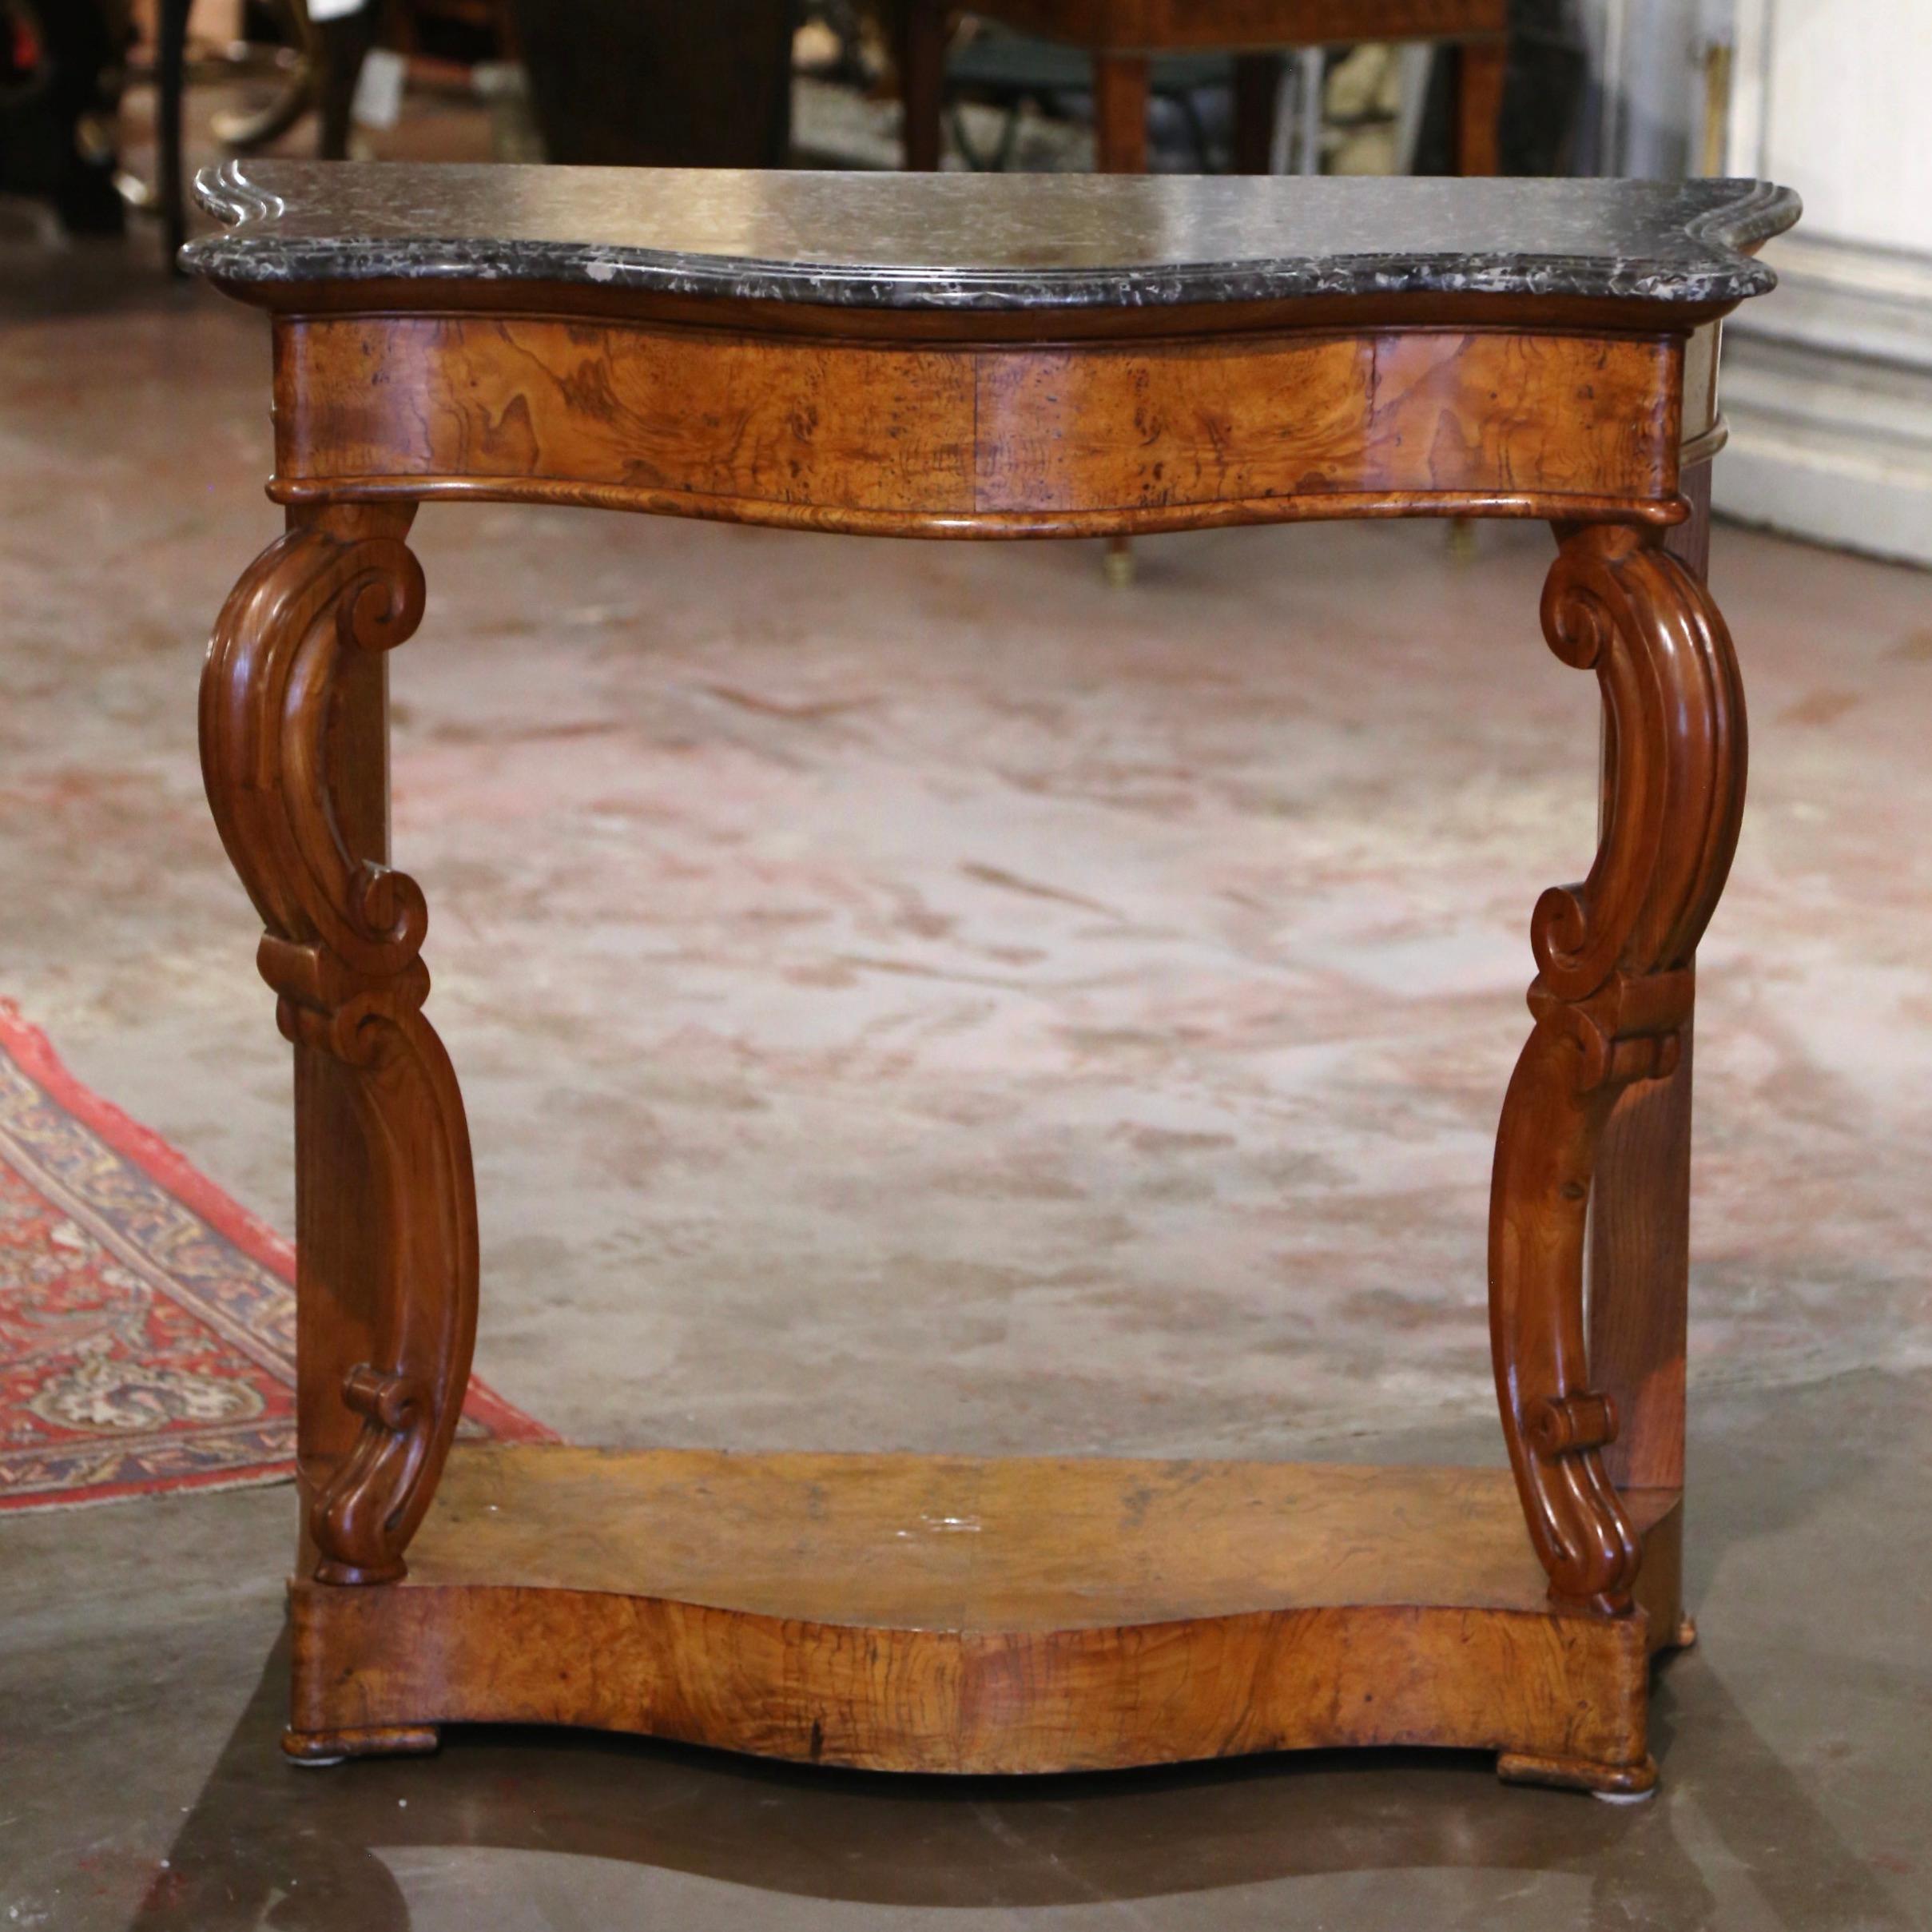 Decorate an entry or hallway with this elegant antique console. Crafted in France circa 1870, the table stands on two front cabriole legs with double volutes ending with hand carved acanthus leaf motifs; the console is further dressed with a lower